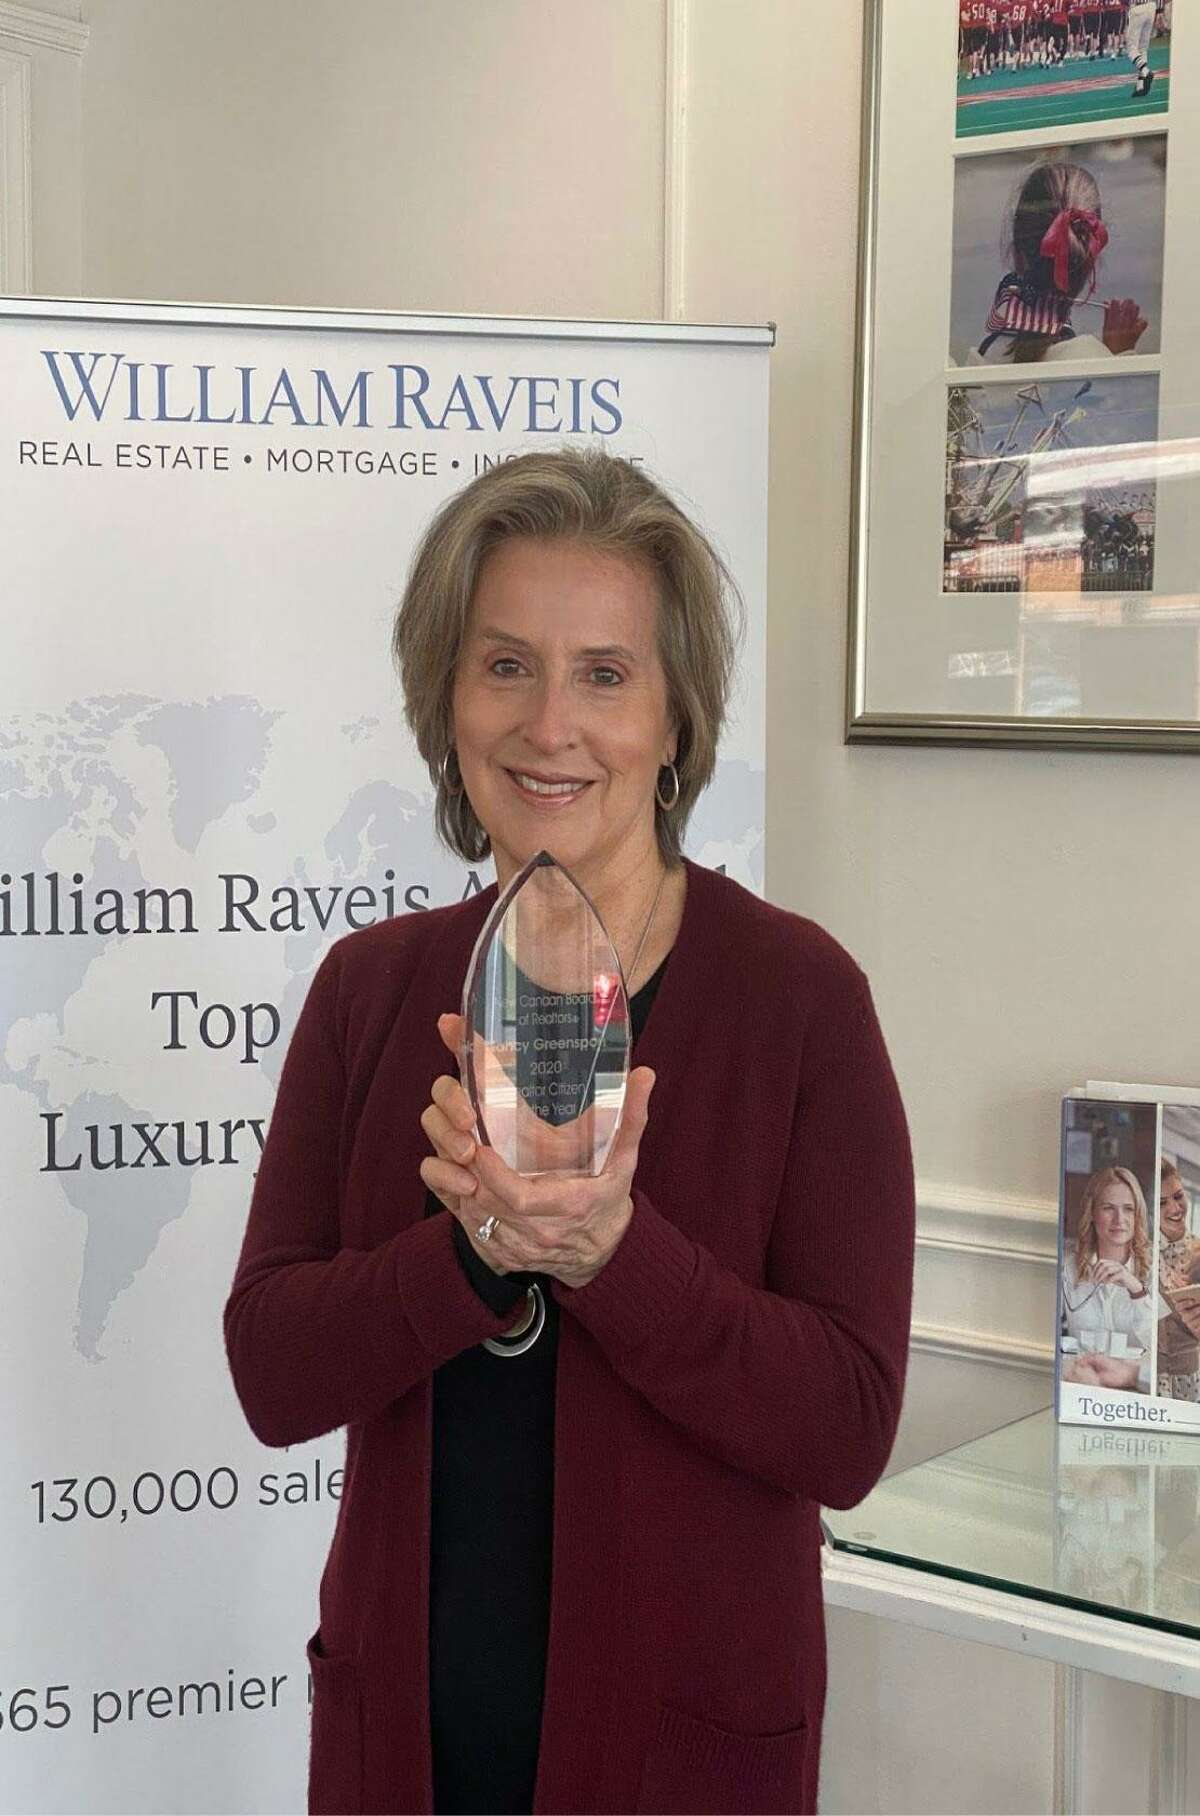 At its January General Membership meeting, New Canaan Board of Realtors President Melissa Rwambuya announced the award of the Board’s 2020 Realtor Citizen of the Year to Nancy Greenspon, (pictured), who is also of William Raveis in New Canaan, Connecticut.